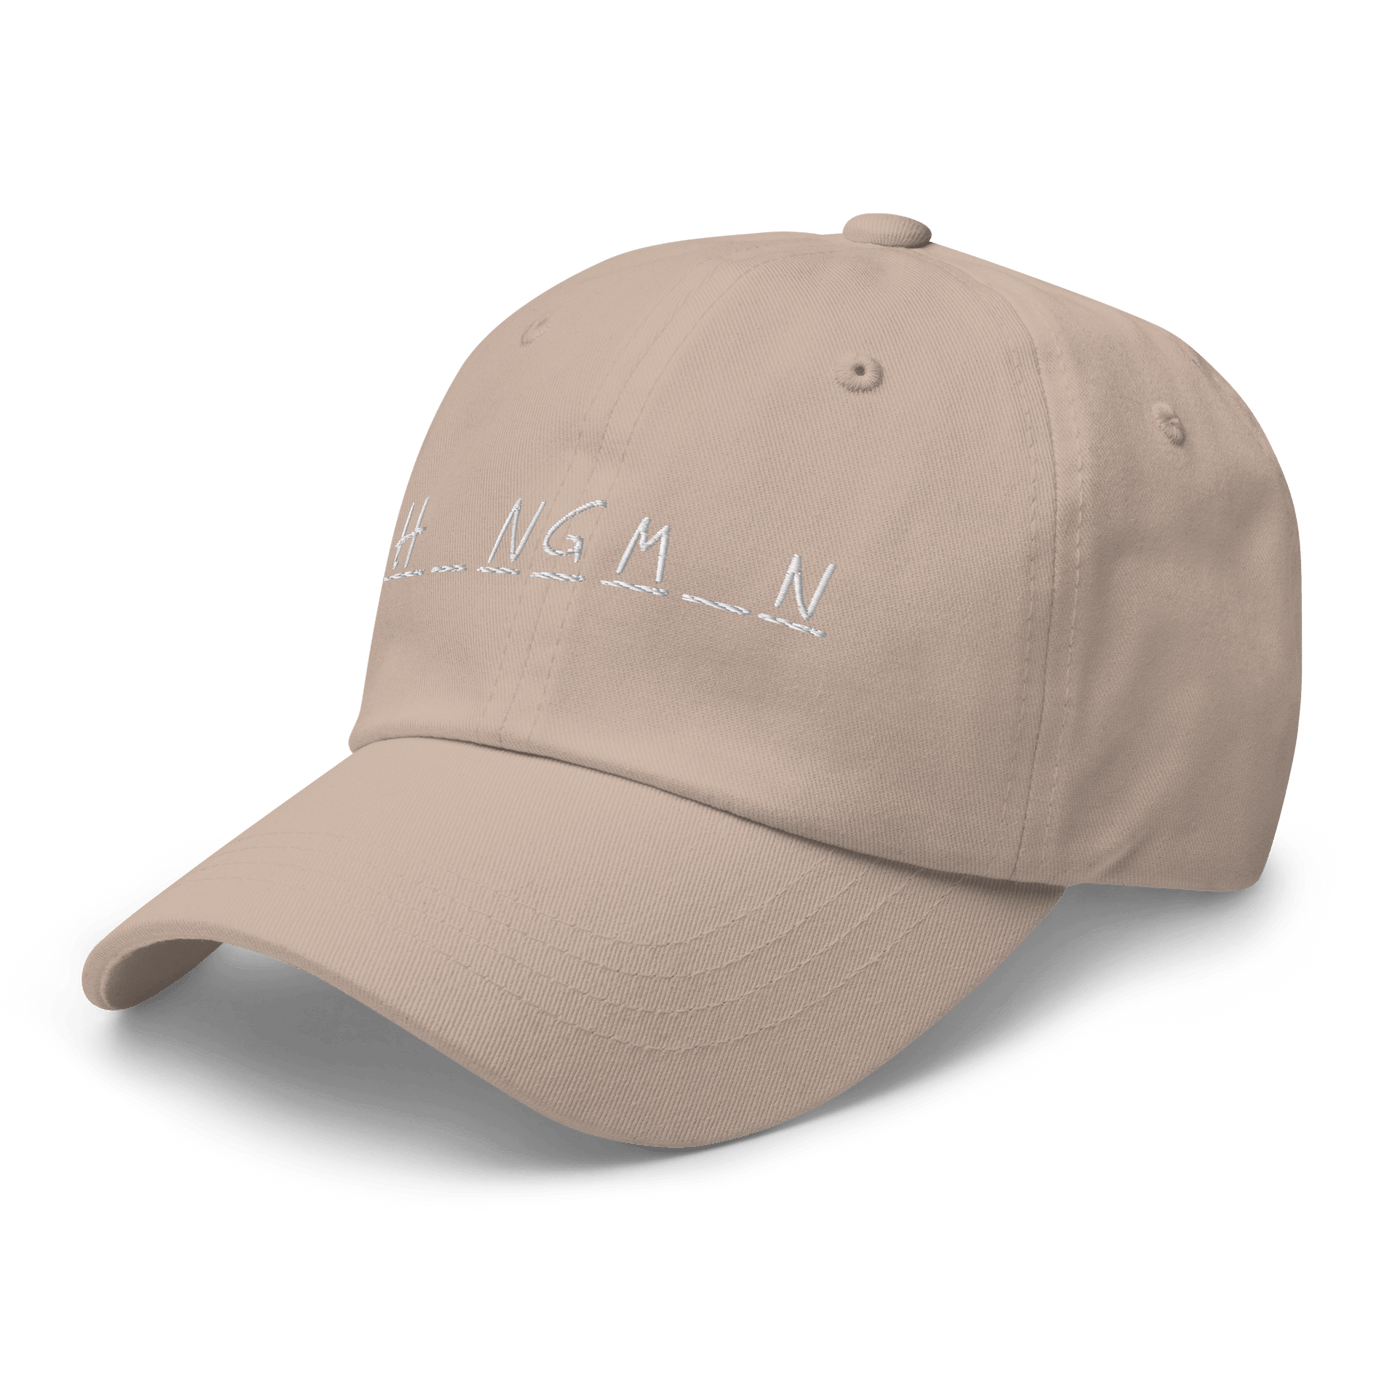 Hangman Dad hat - Stone - - Just Another Cap Store